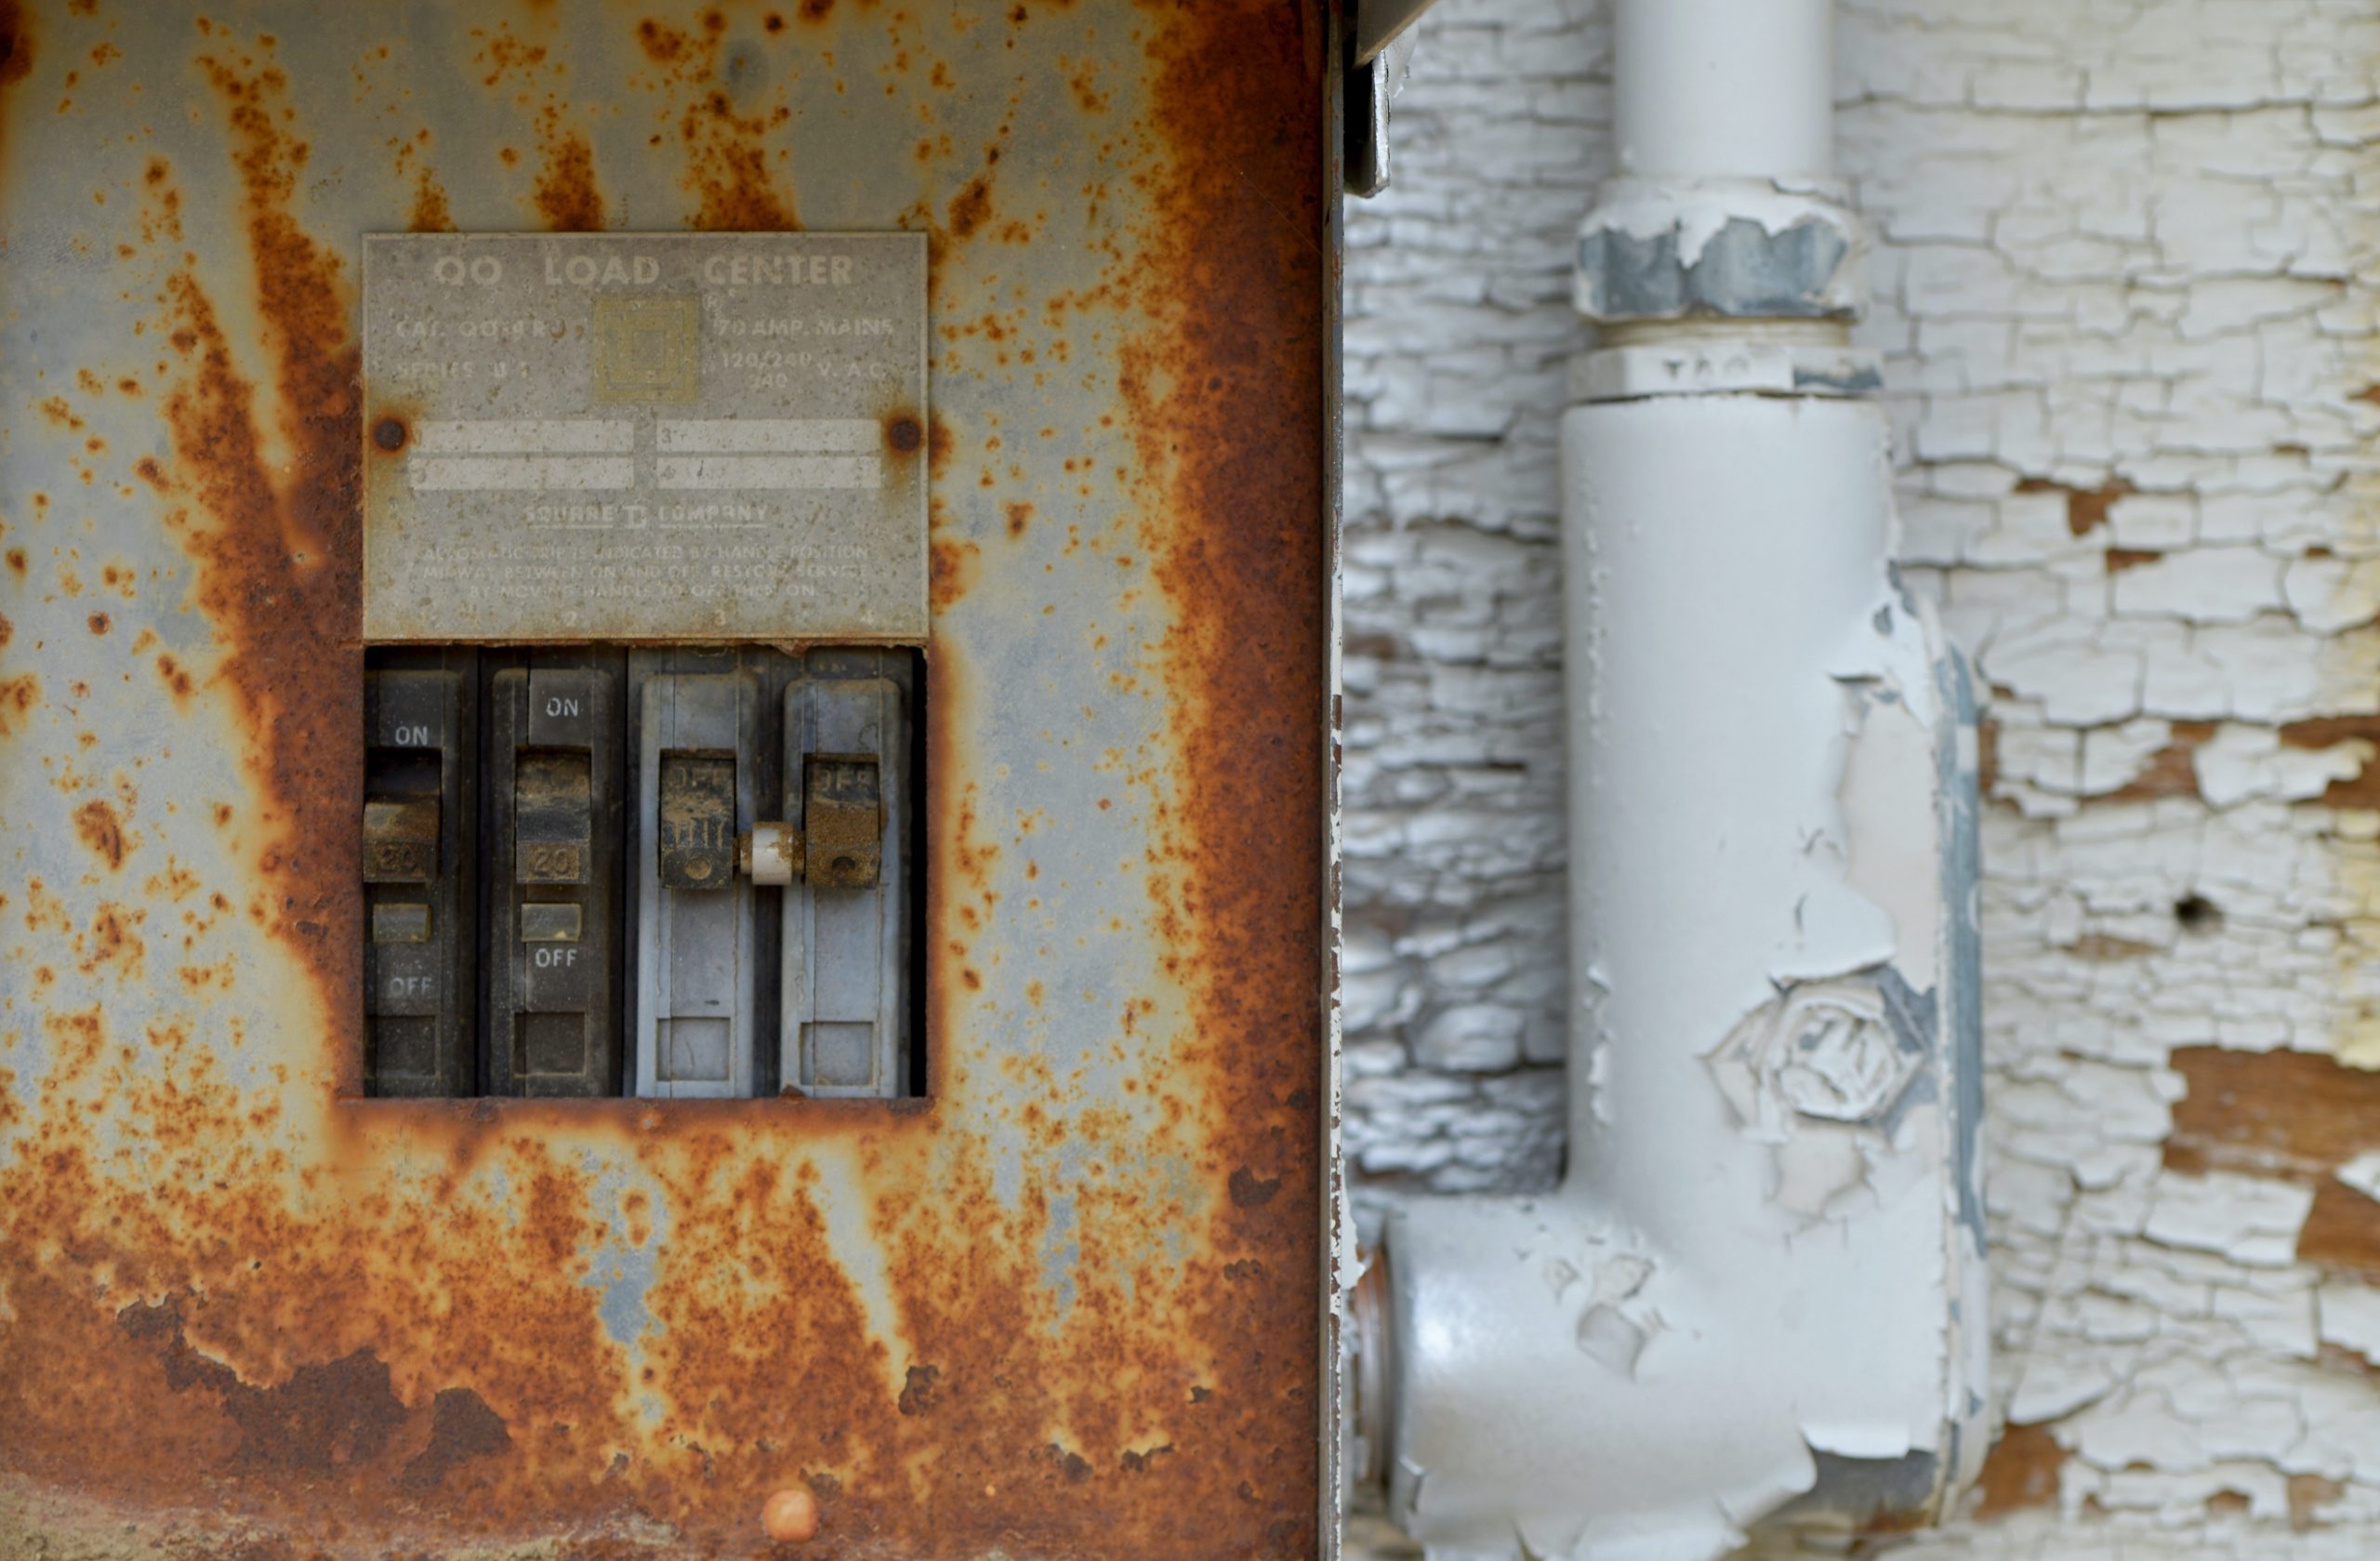 How To Replace A Circuit Breaker Without Turning Off Power